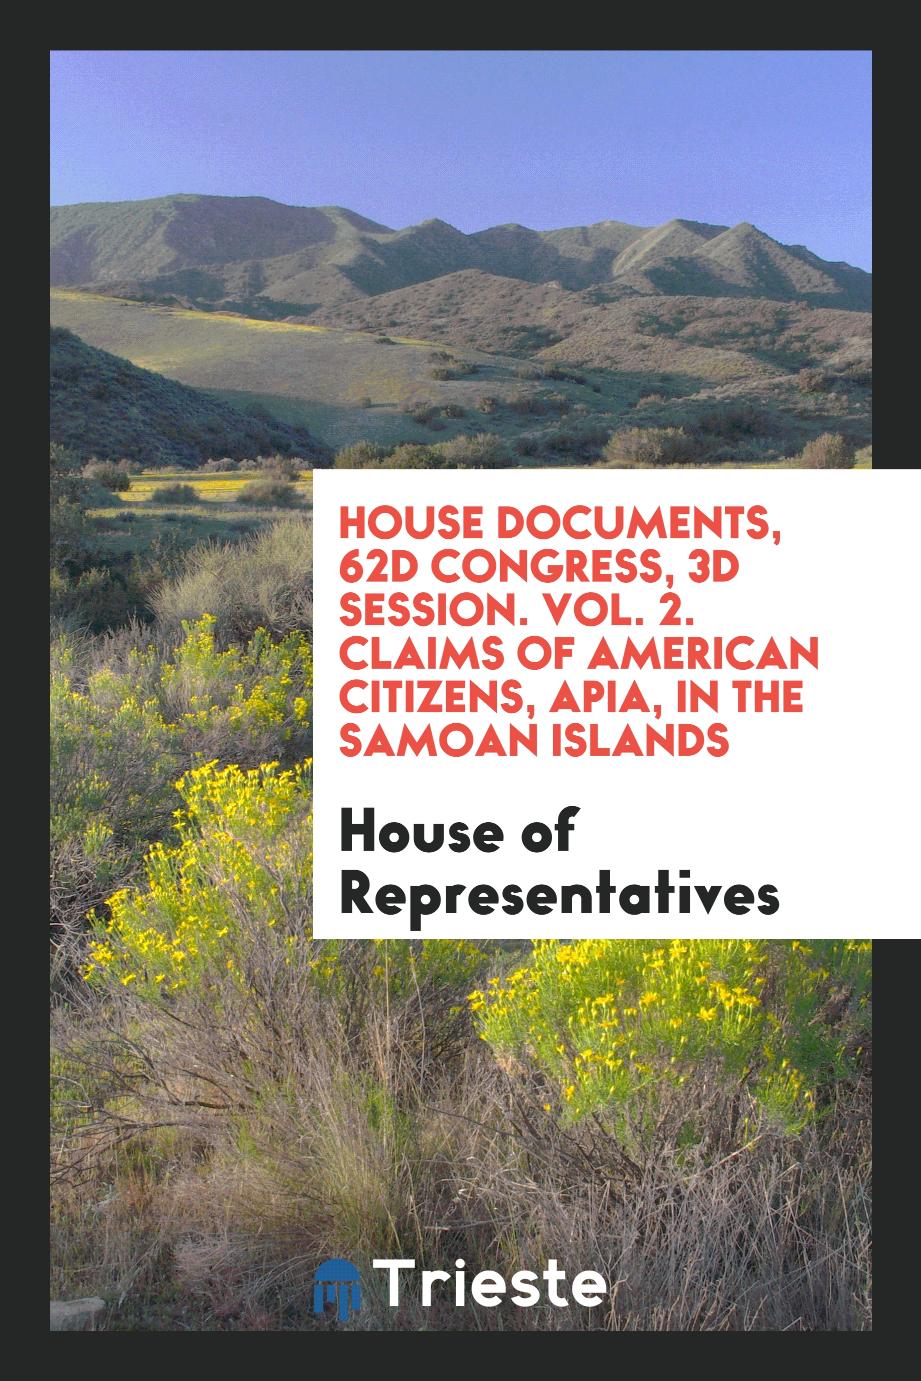 House of Representatives - House Documents, 62d Congress, 3d Session. Vol. 2. Claims of American Citizens, Apia, in the Samoan Islands